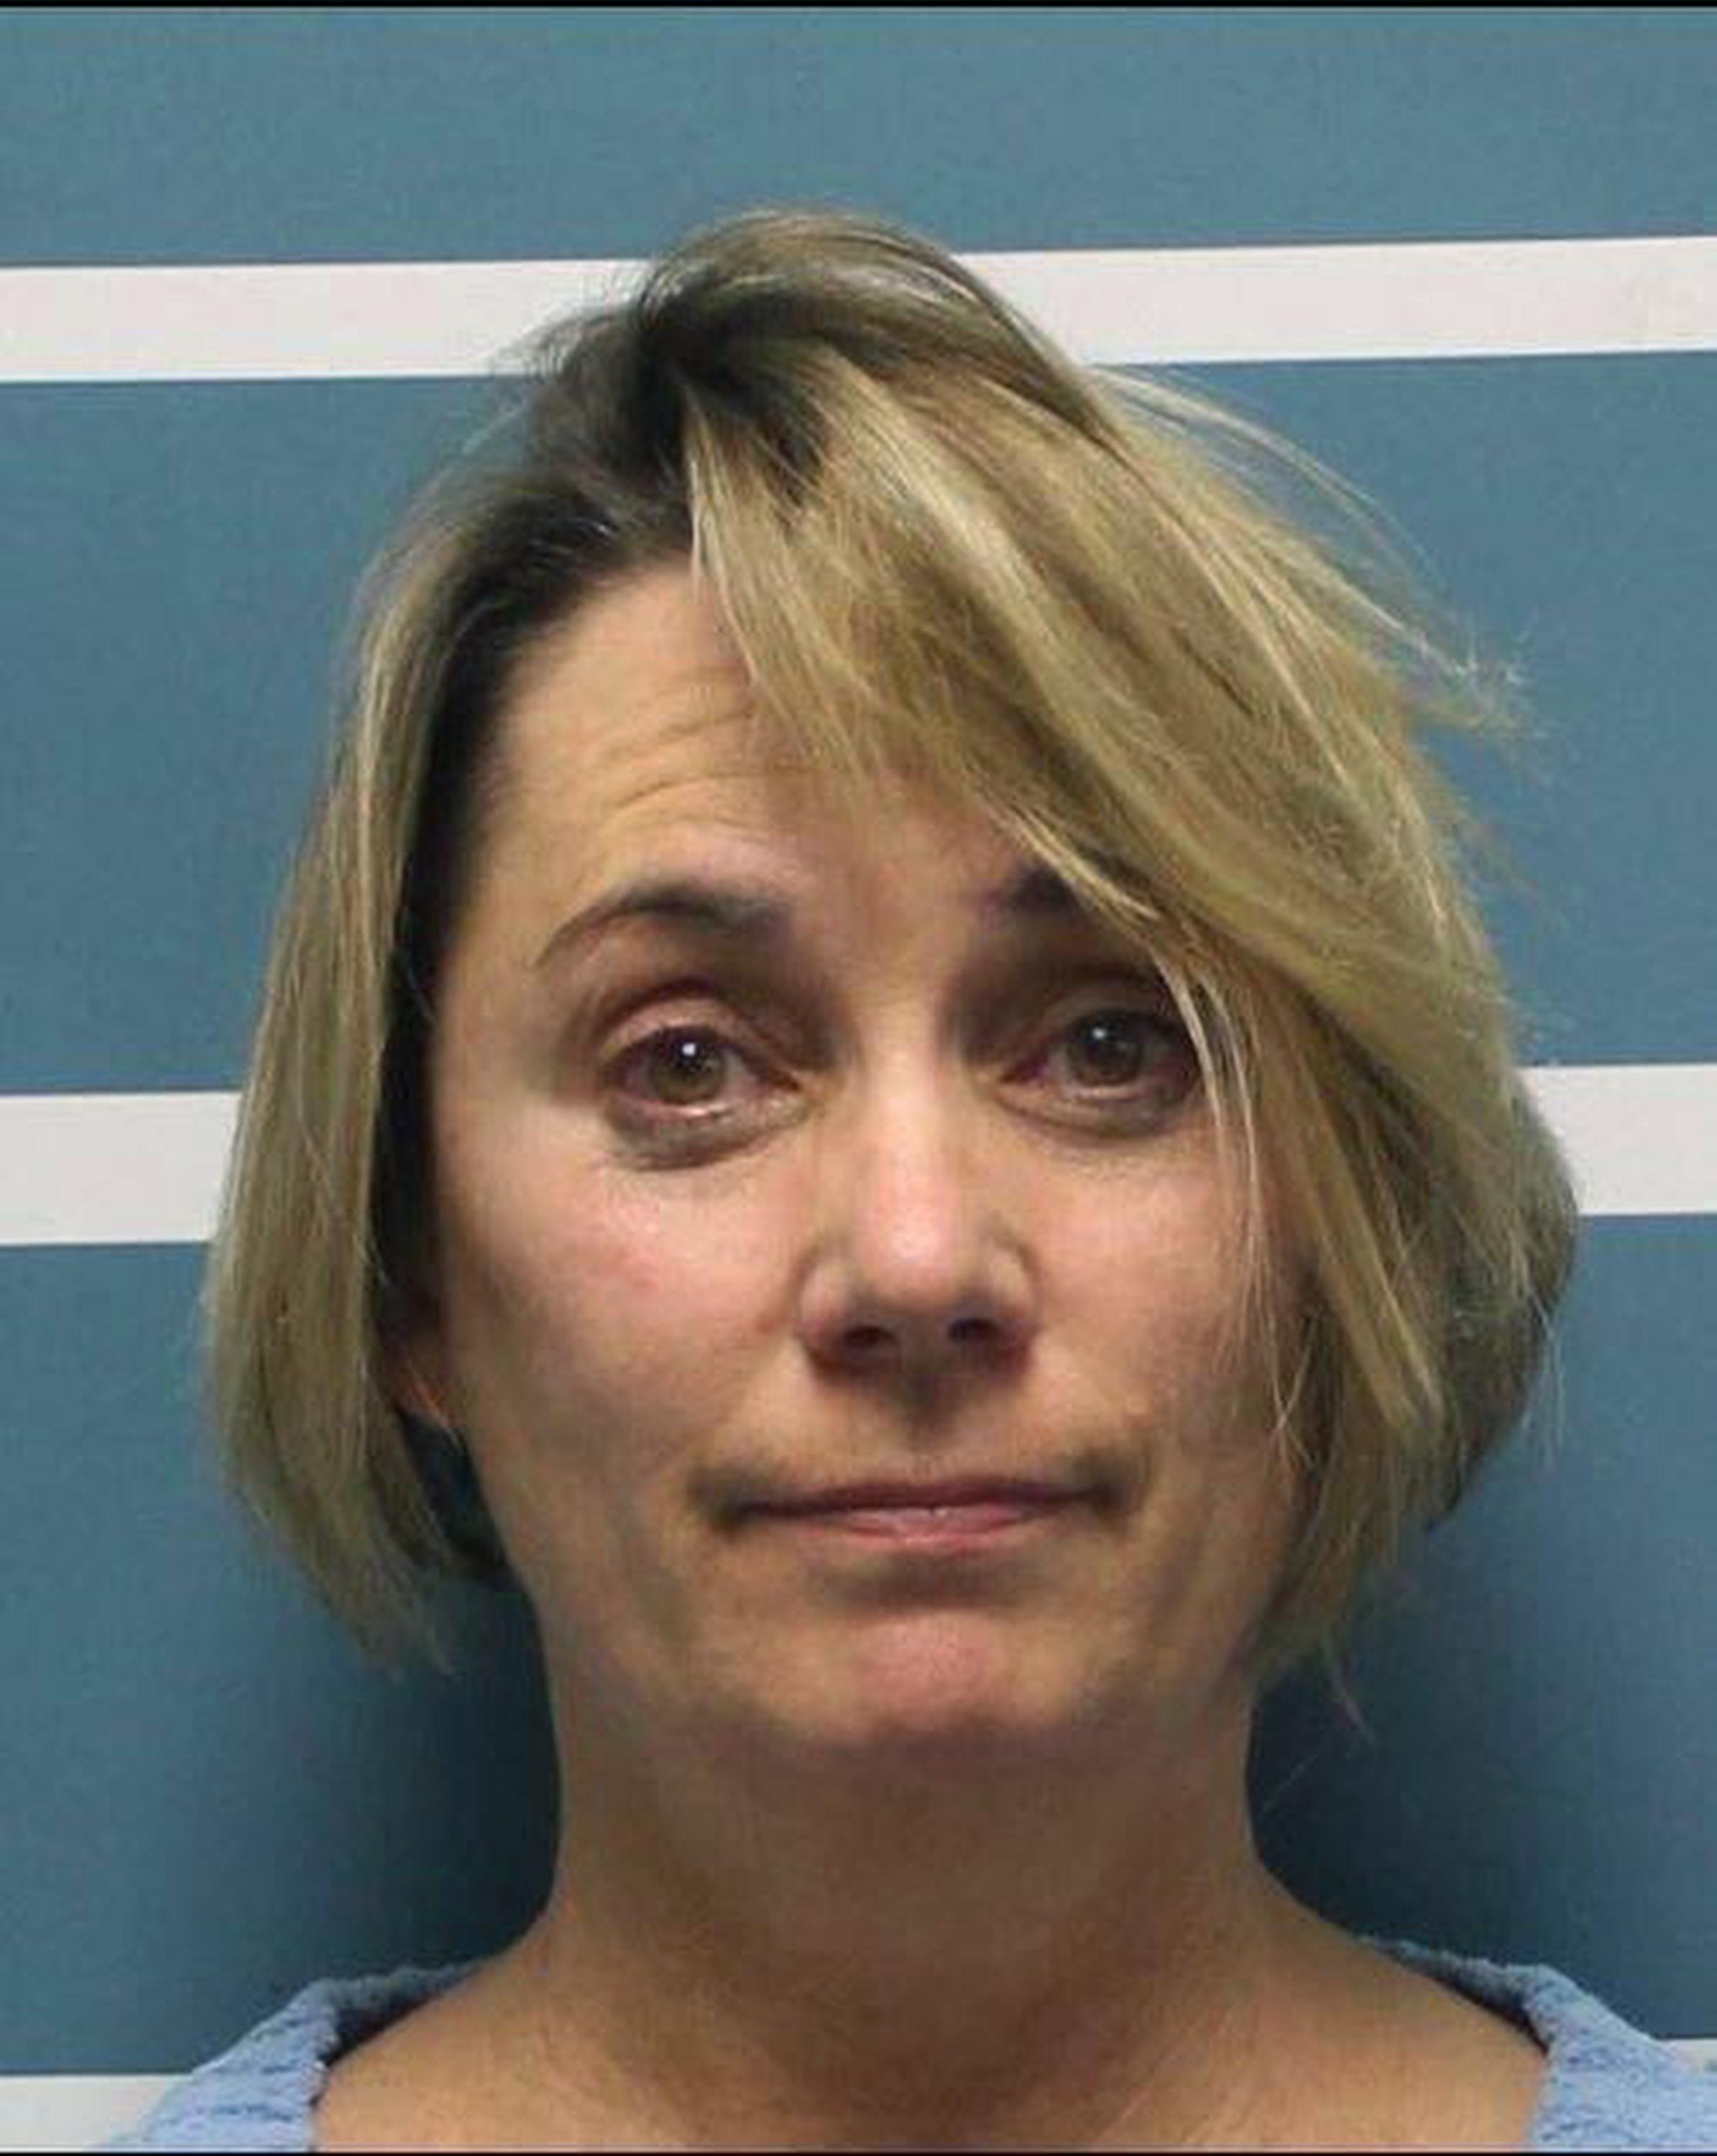 California Teacher Charged After Forcing Haircut On Boy